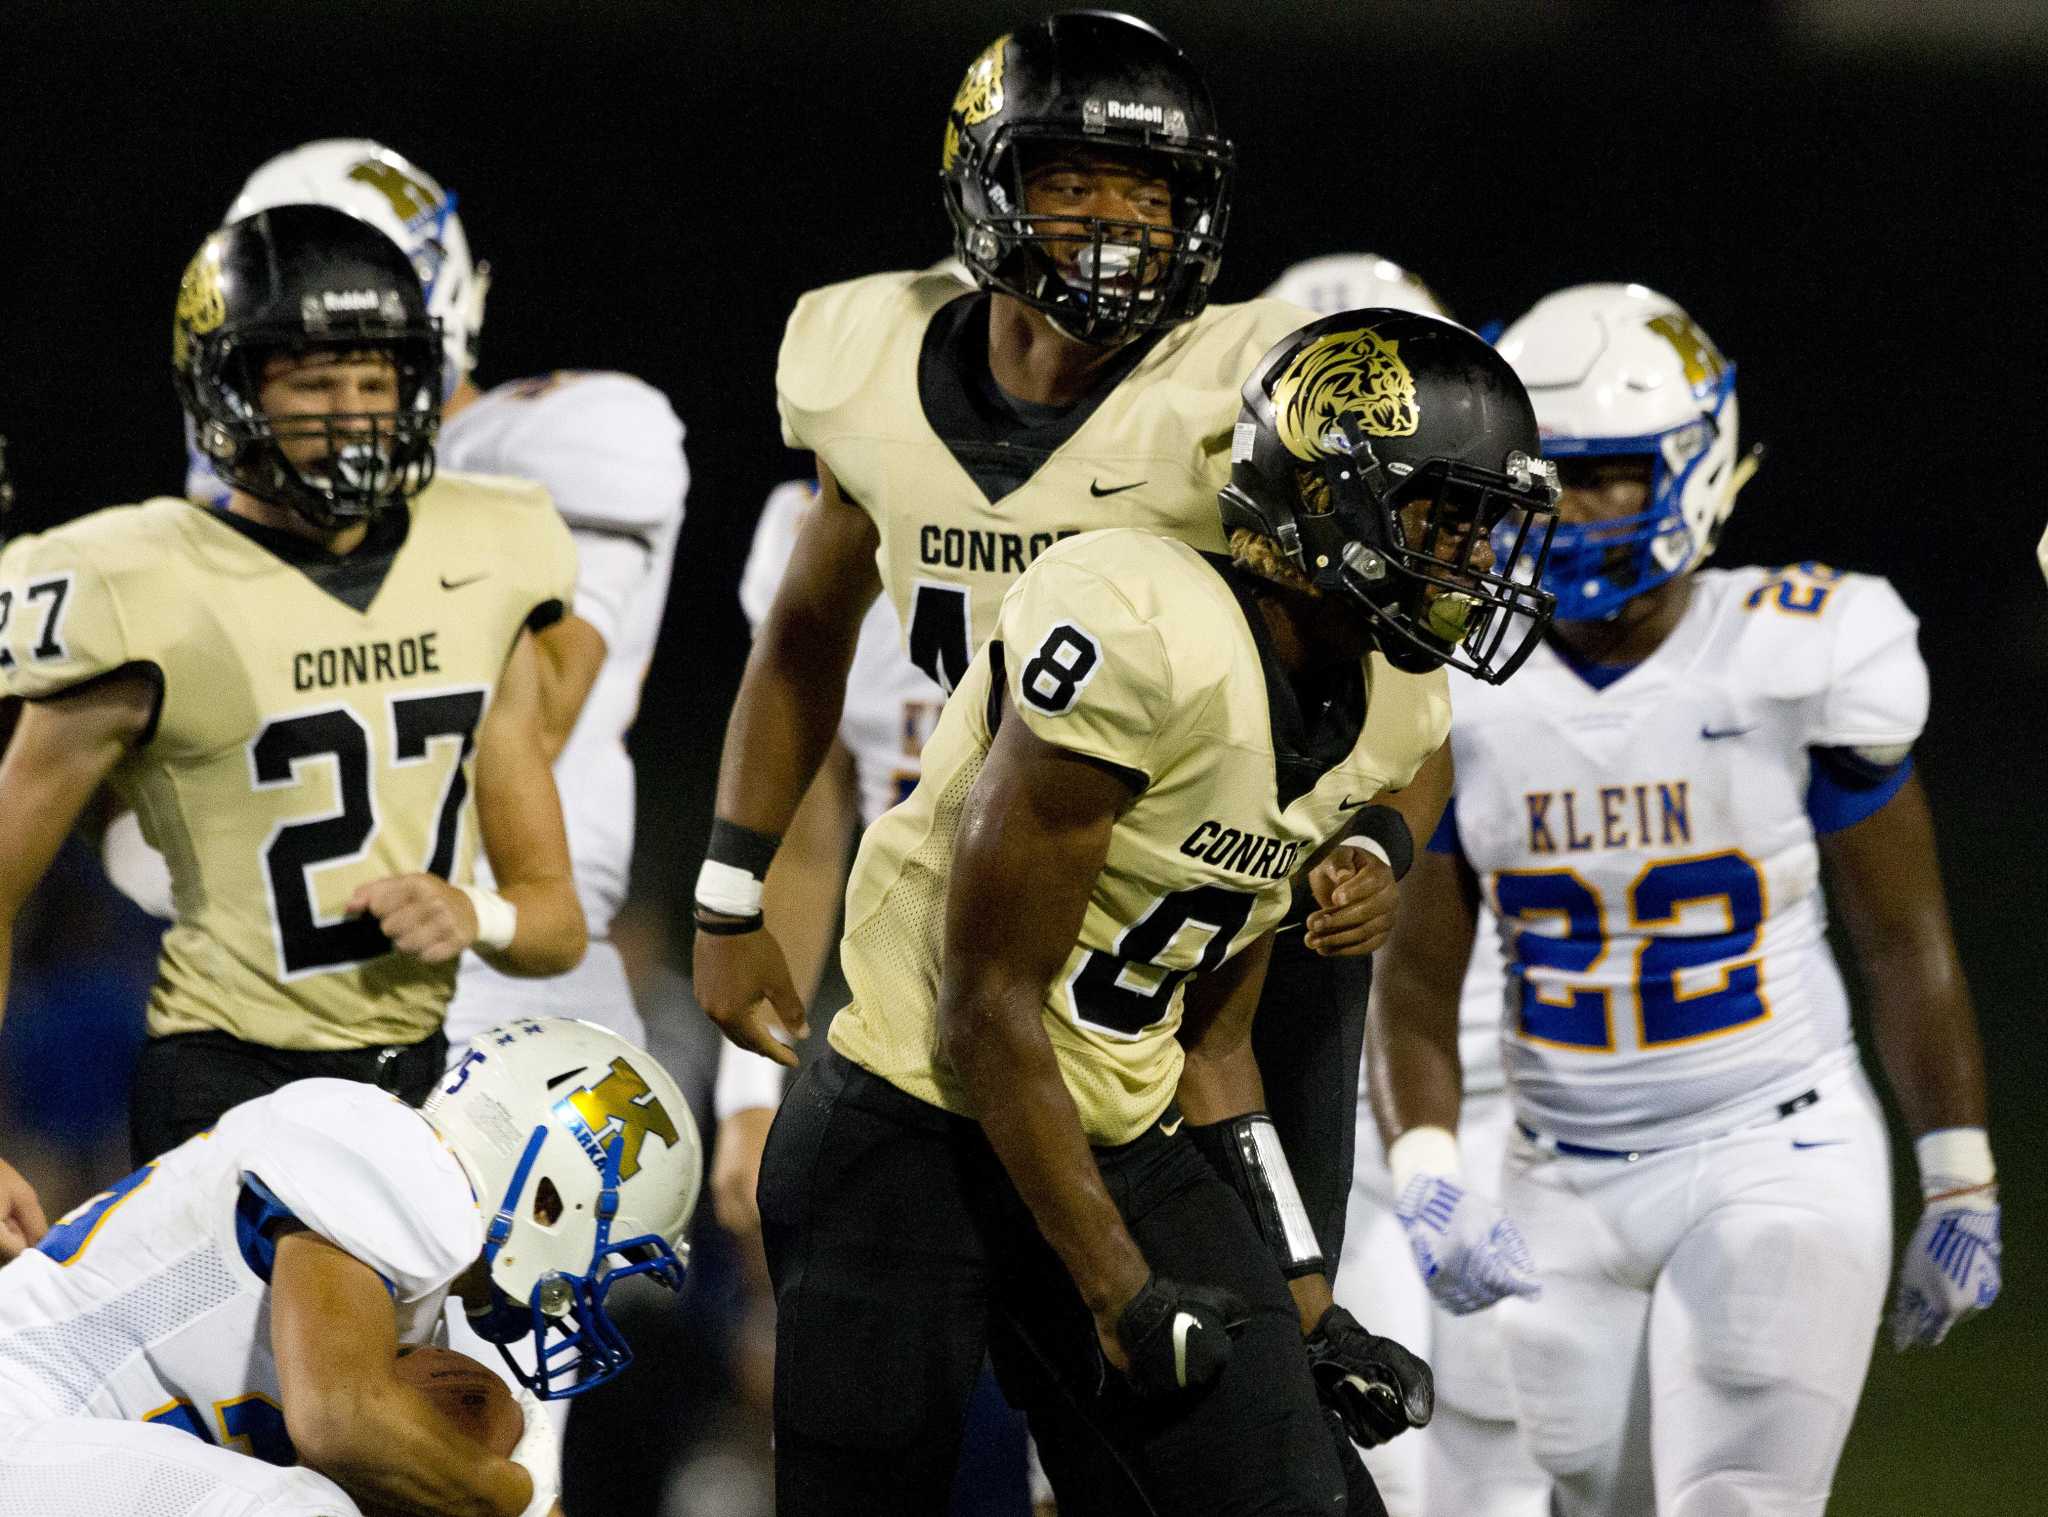 FOOTBALL: Conroe routs Klein for huge homecoming win